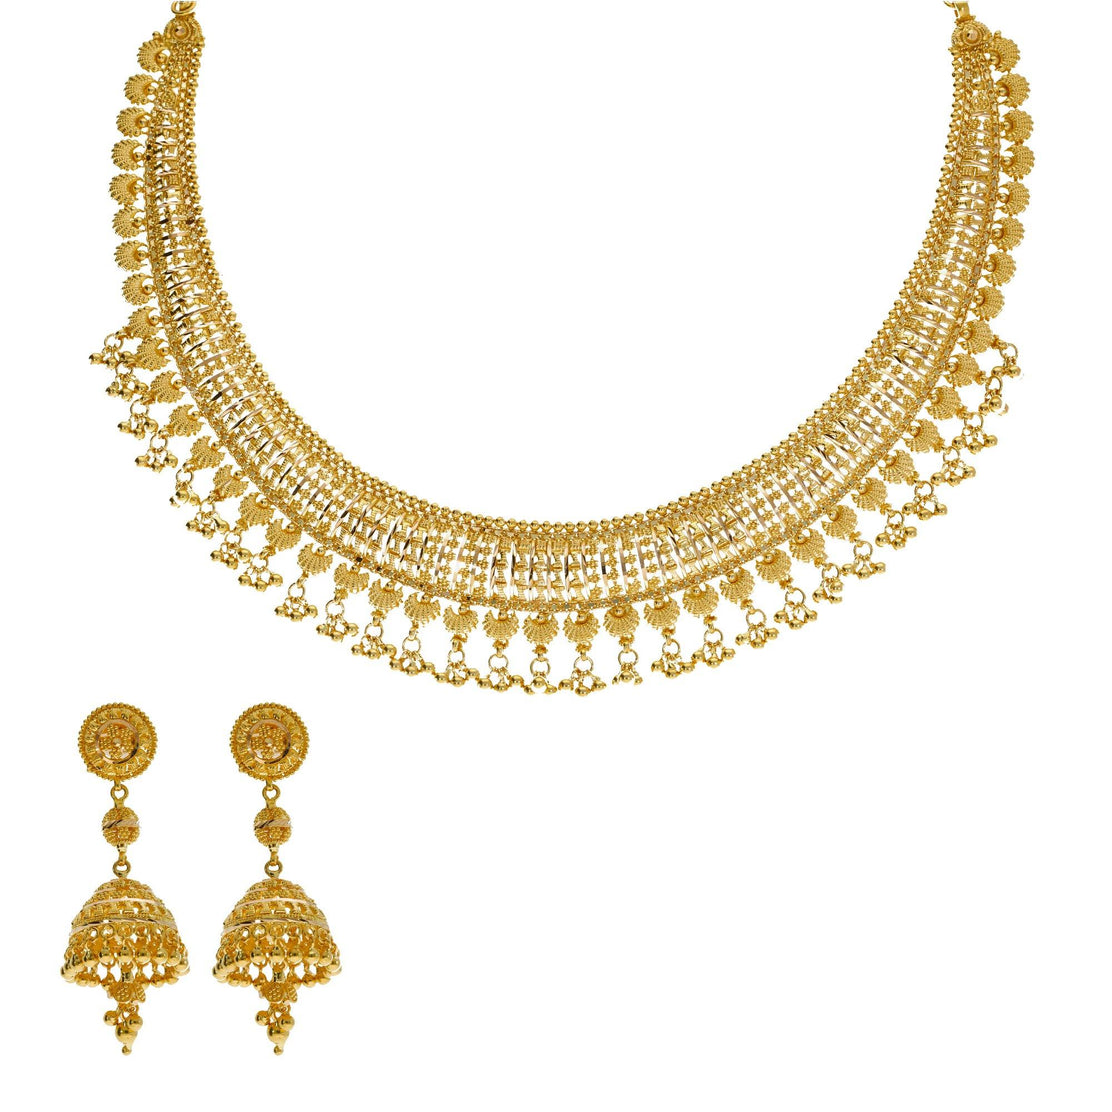 Antique Gold Finish Pearl Necklace set | AMETHYST JEWELZ